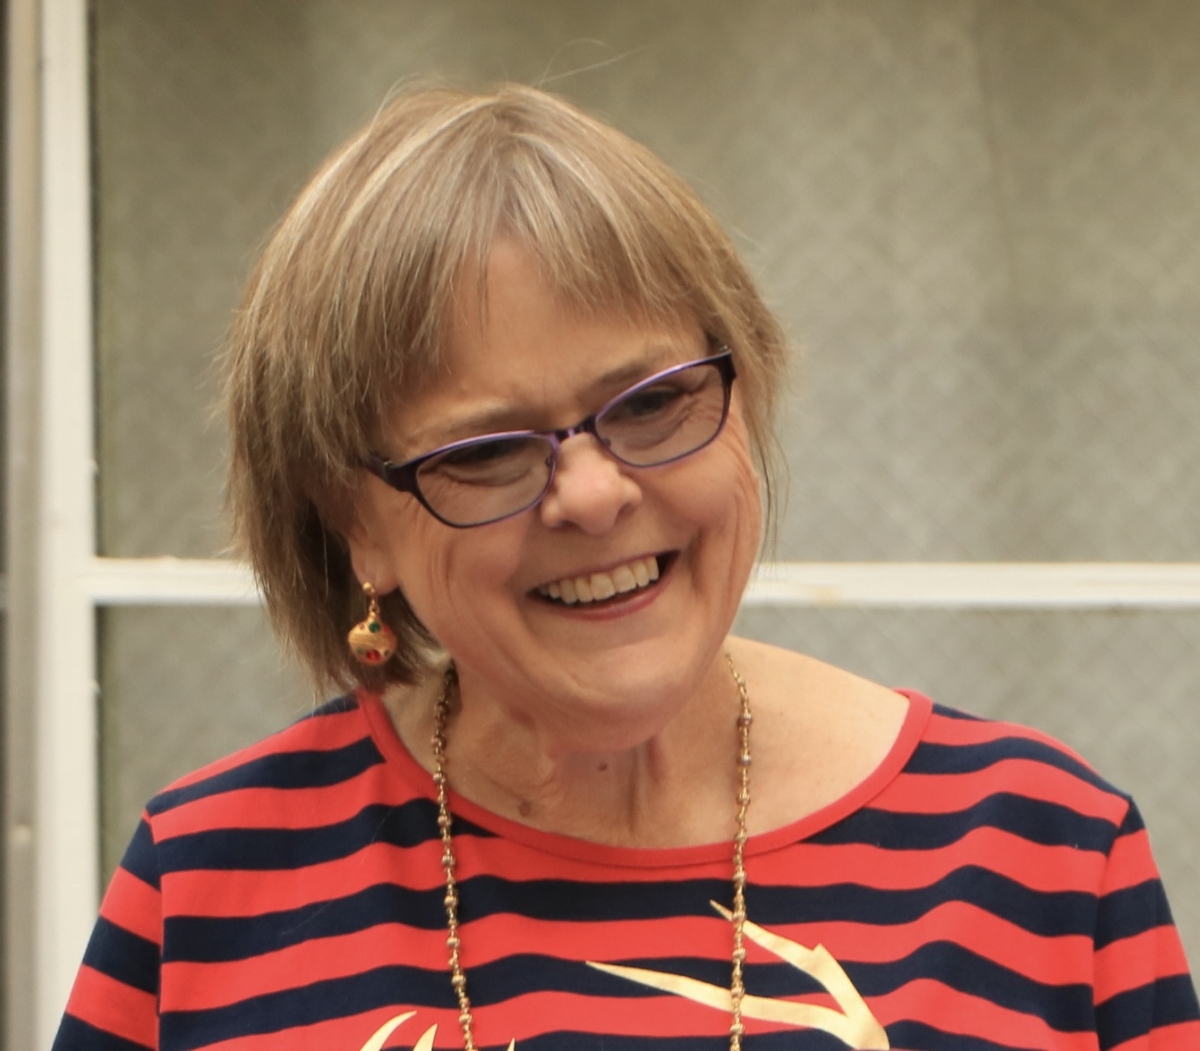 Smiling person with chin-length blonde hair, wearing a red and black horizontally striped shirt, gold necklace and dangling earrings, and purple glasses